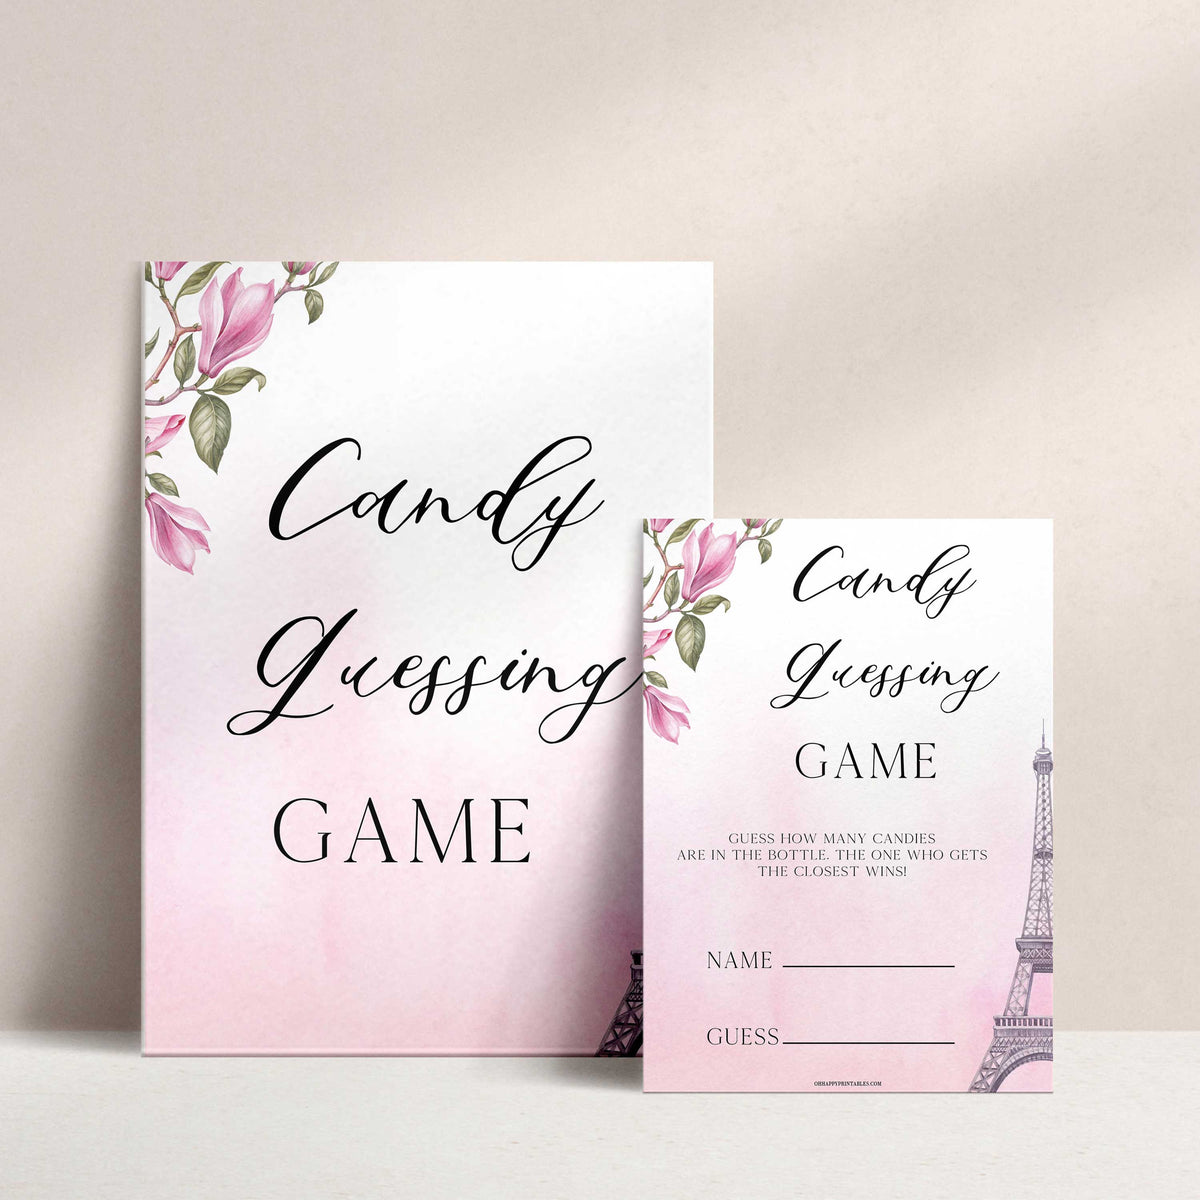 candy guessing game, Paris baby shower games, printable baby shower games, Parisian baby shower games, fun baby shower games